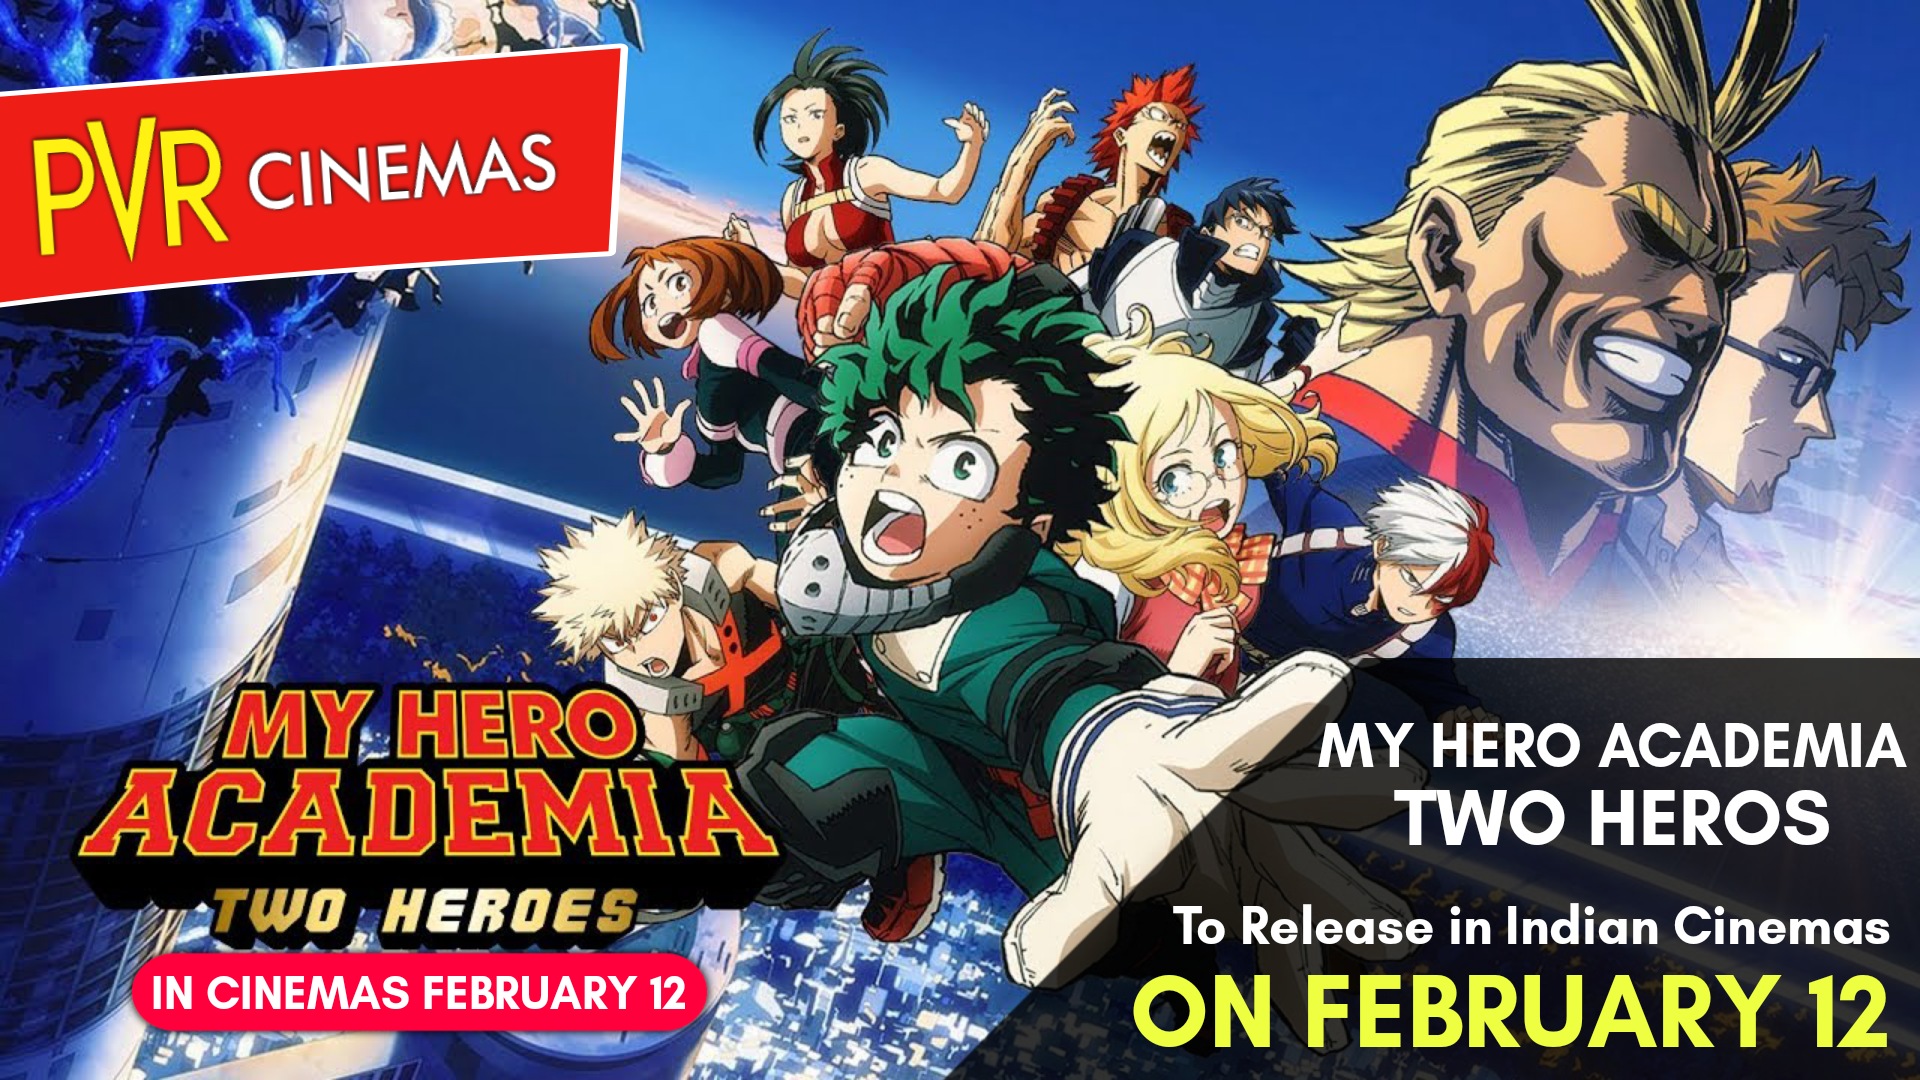 PVR Cinemas To Release " My Hero Academia " Movies in Indian Theatres in February 2021. - ANIME ...